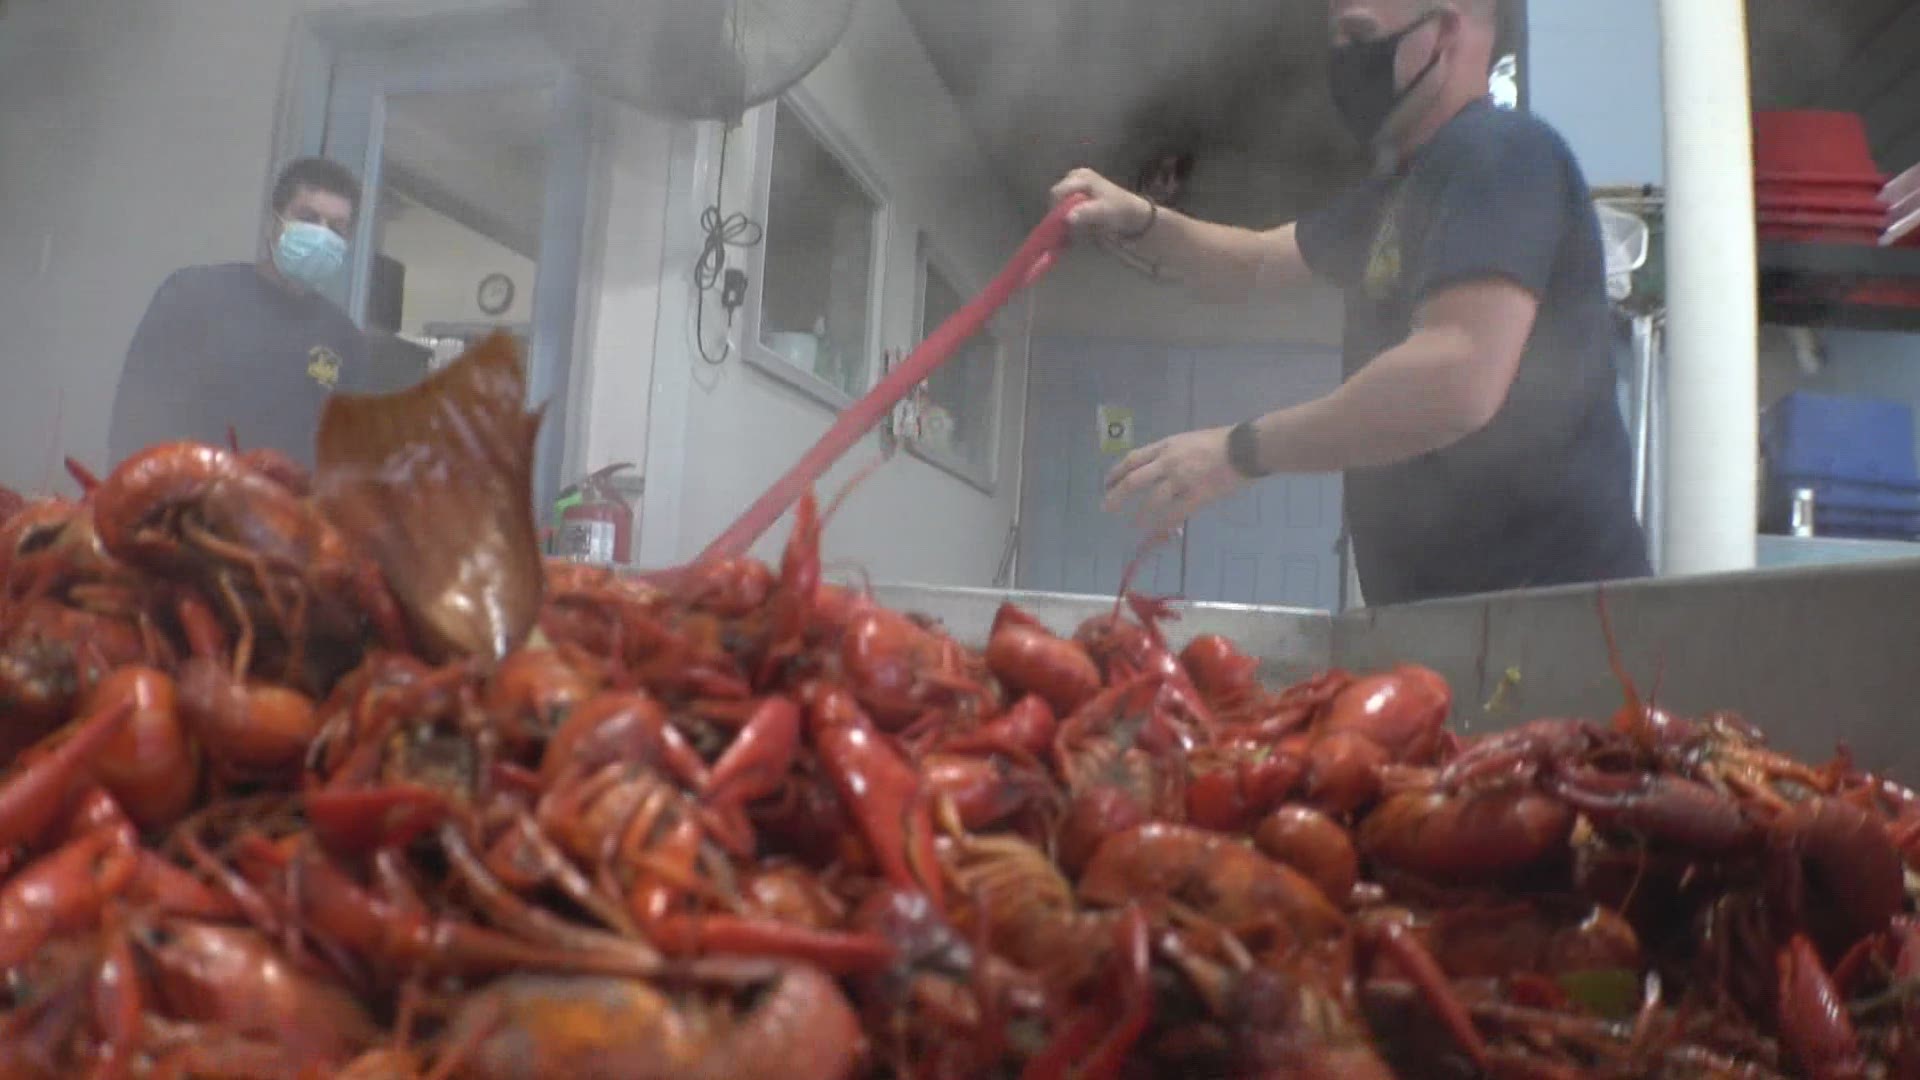 The demand is high for seafood this Easter weekend with some of the pandemic improving. You'll pay a little more for crawfish, but there is plenty of it.